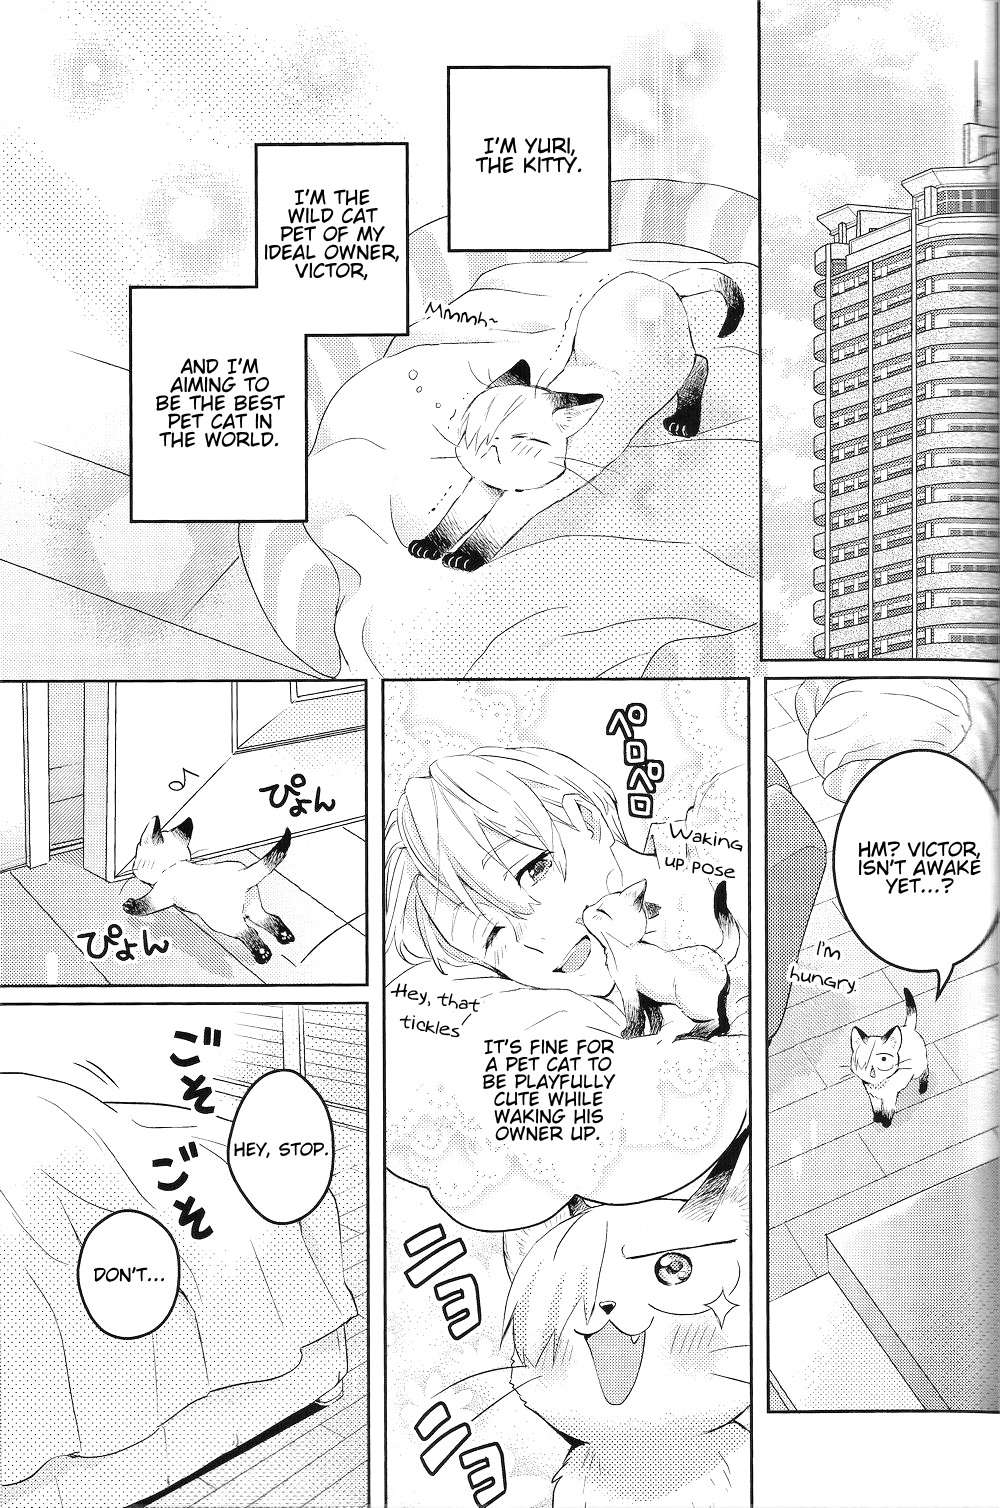 Yuri!!! on Ice - We Are Cats (Doujinshi) - chapter 2 - #4